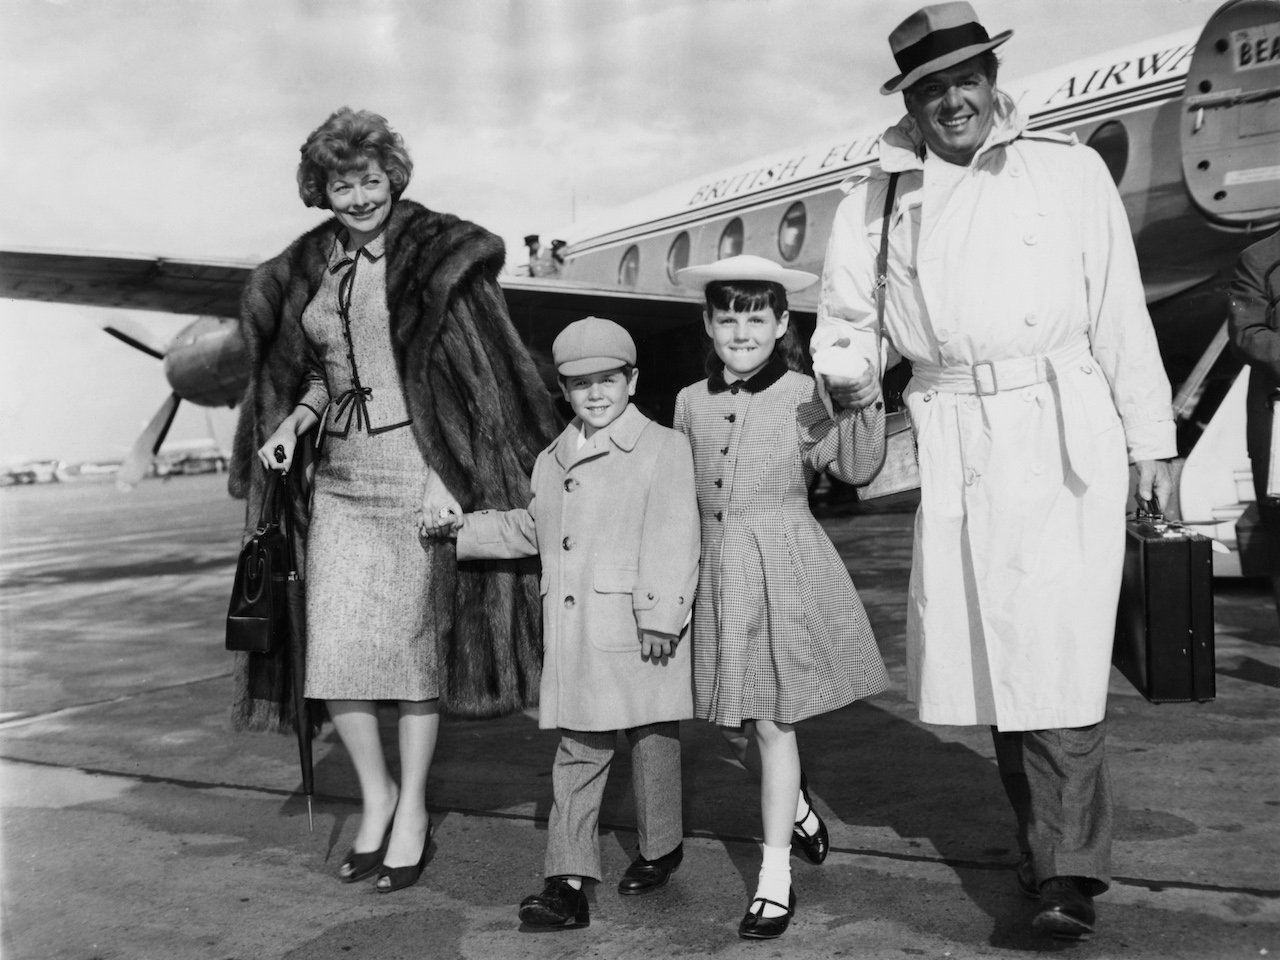 'I Love Lucy' stars Lucille Ball and her husband Desi Arnaz arrive at London Airport with their children Lucie and Desi Jr.